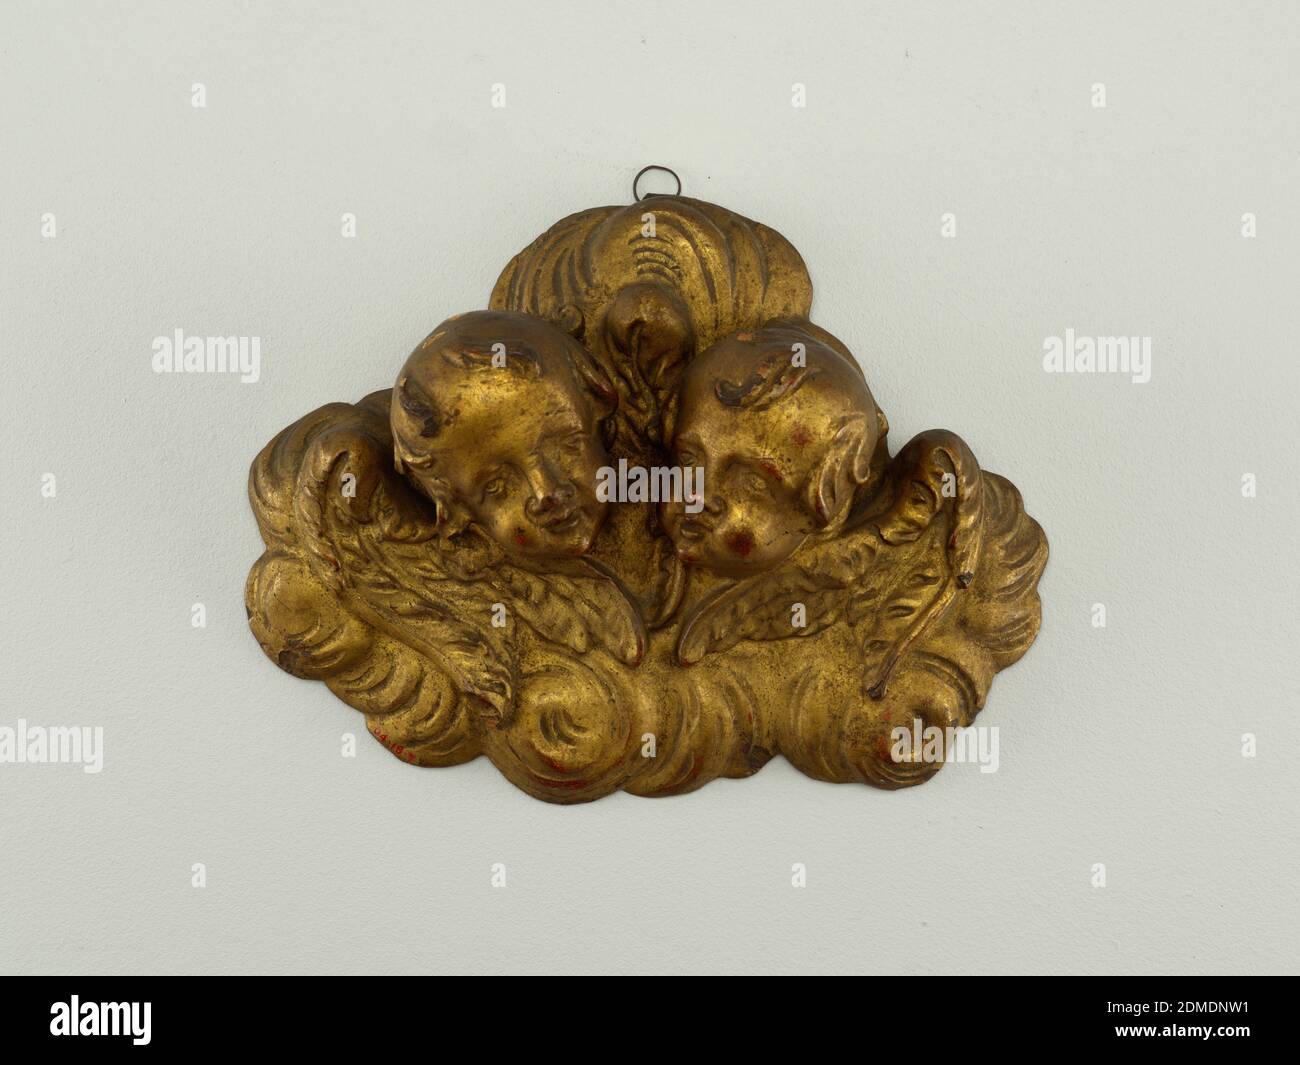 Carving, wood, gilded, 19th century, woodwork, Decorative Arts, Carving Stock Photo